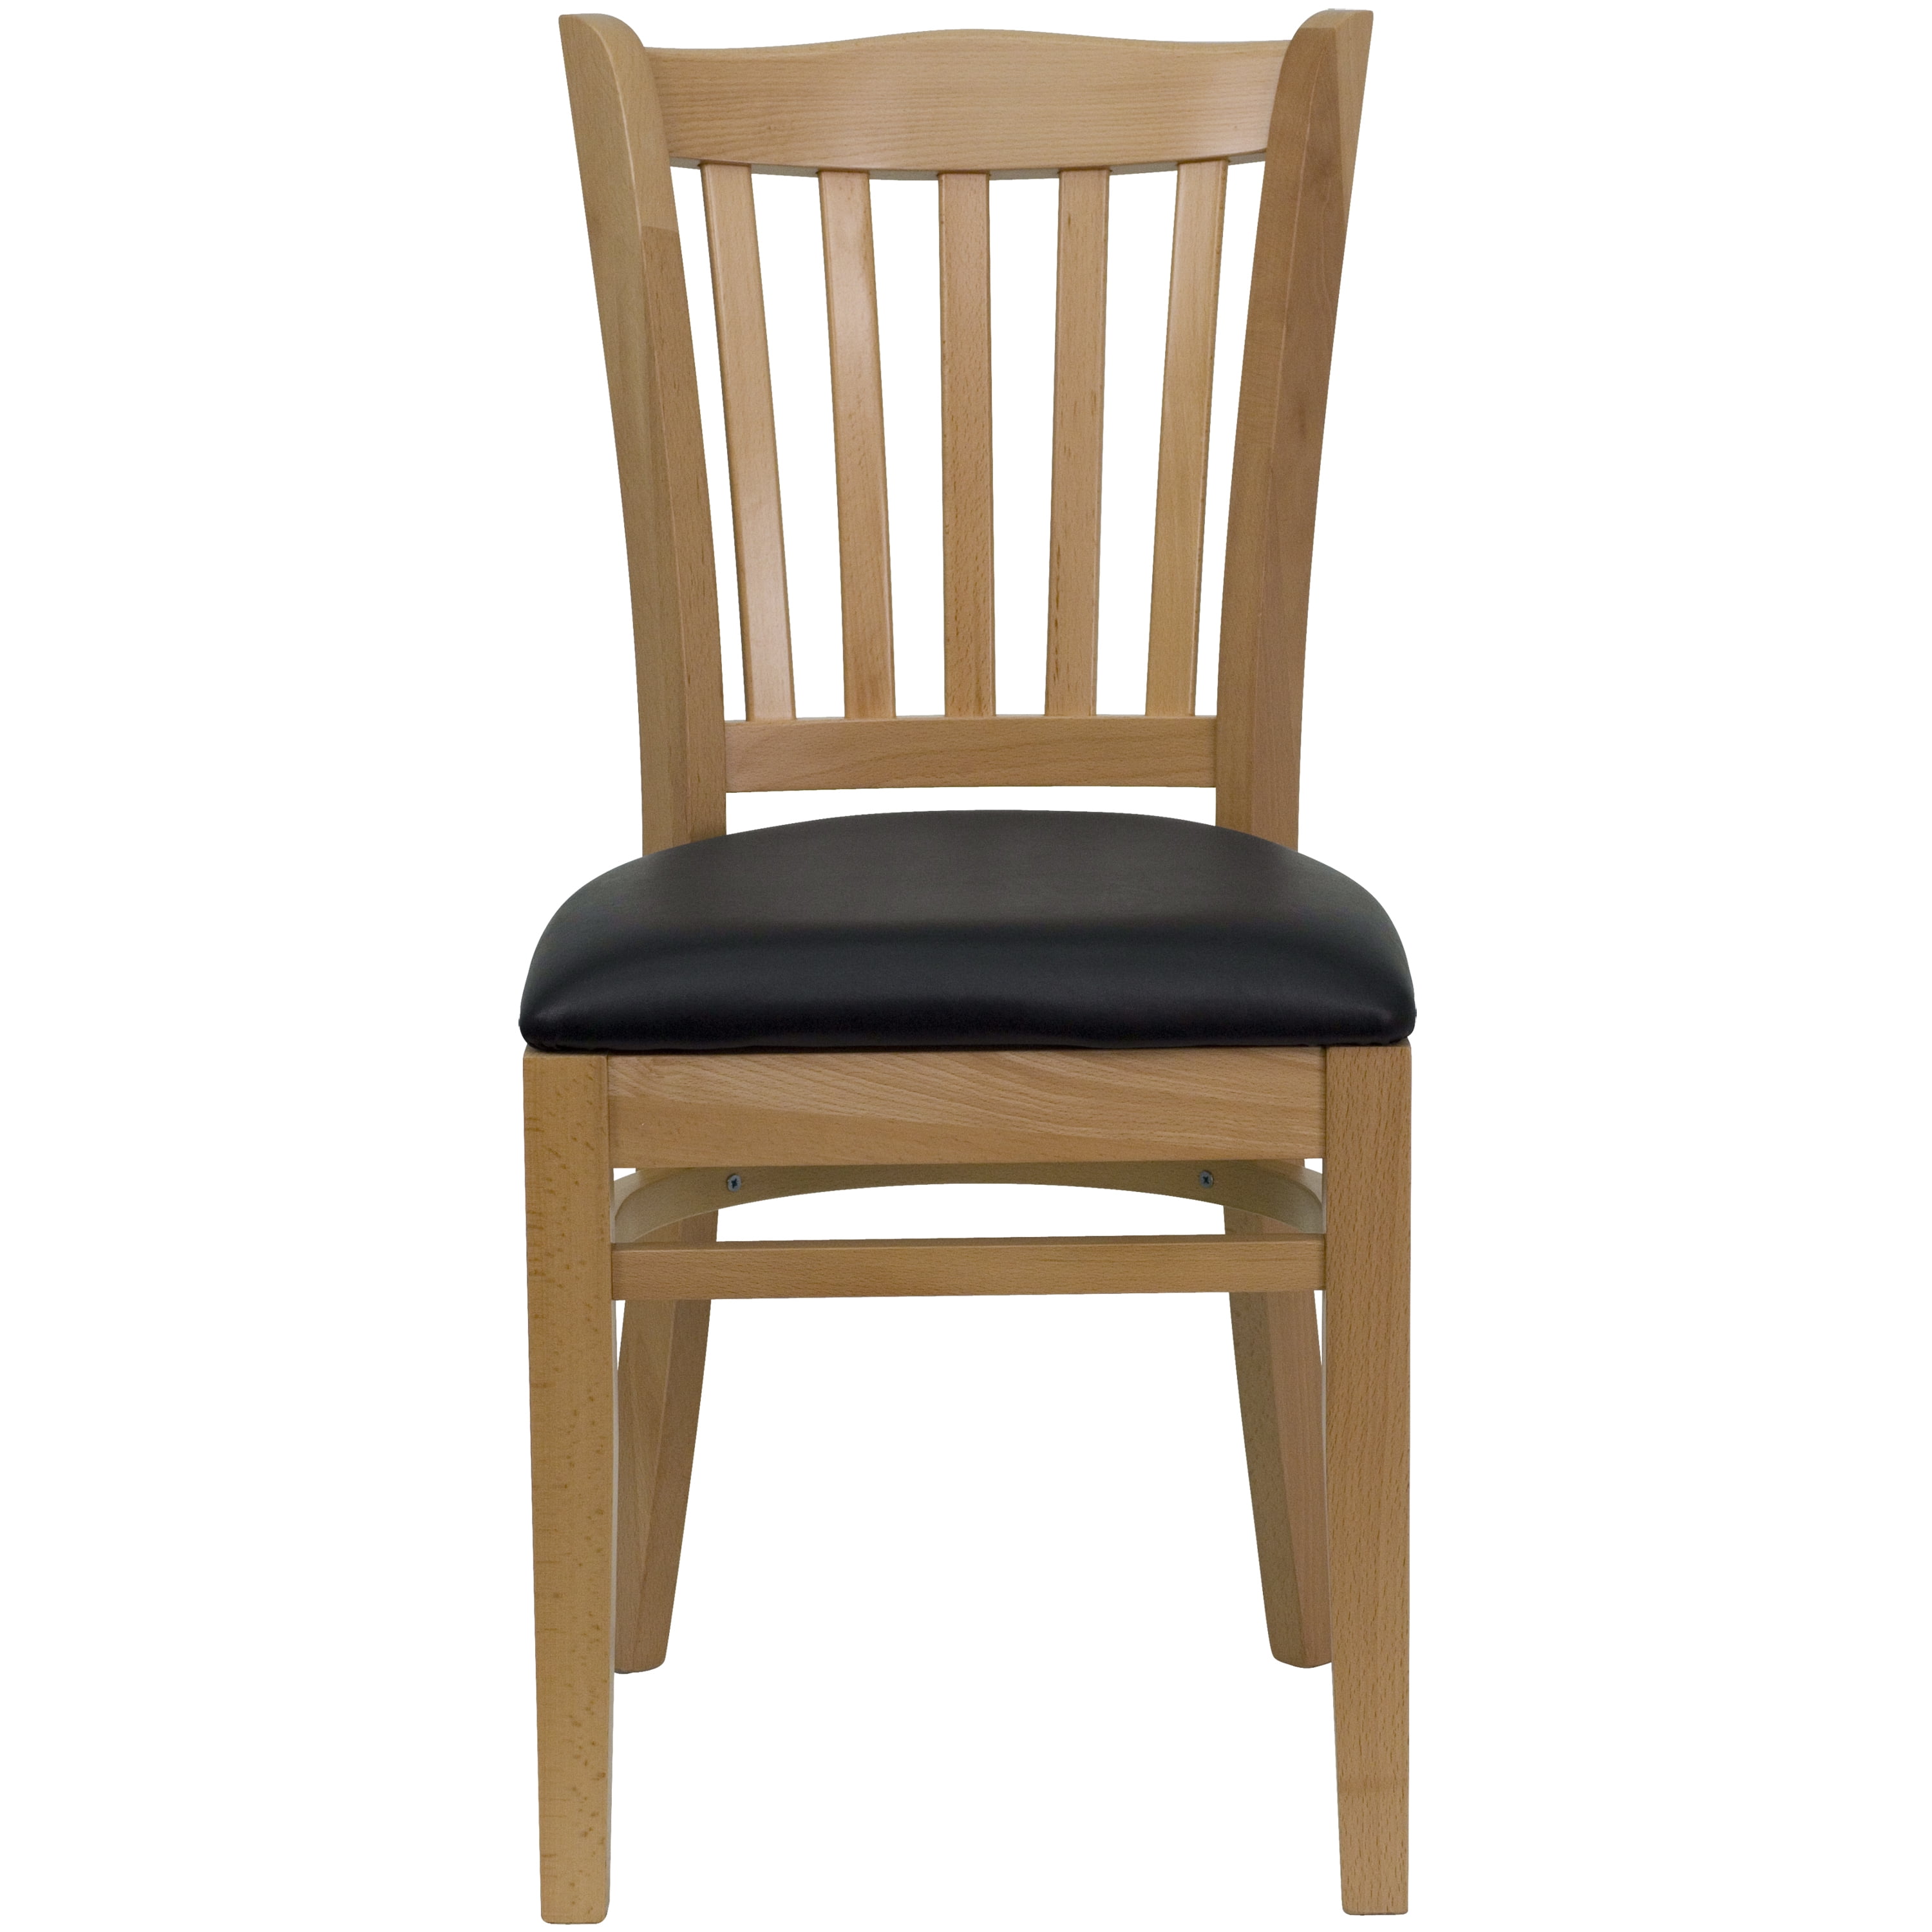 Details about   Mahogany Wood Finished Vertical Slat Back Restaurant Chair with Wood Seat 